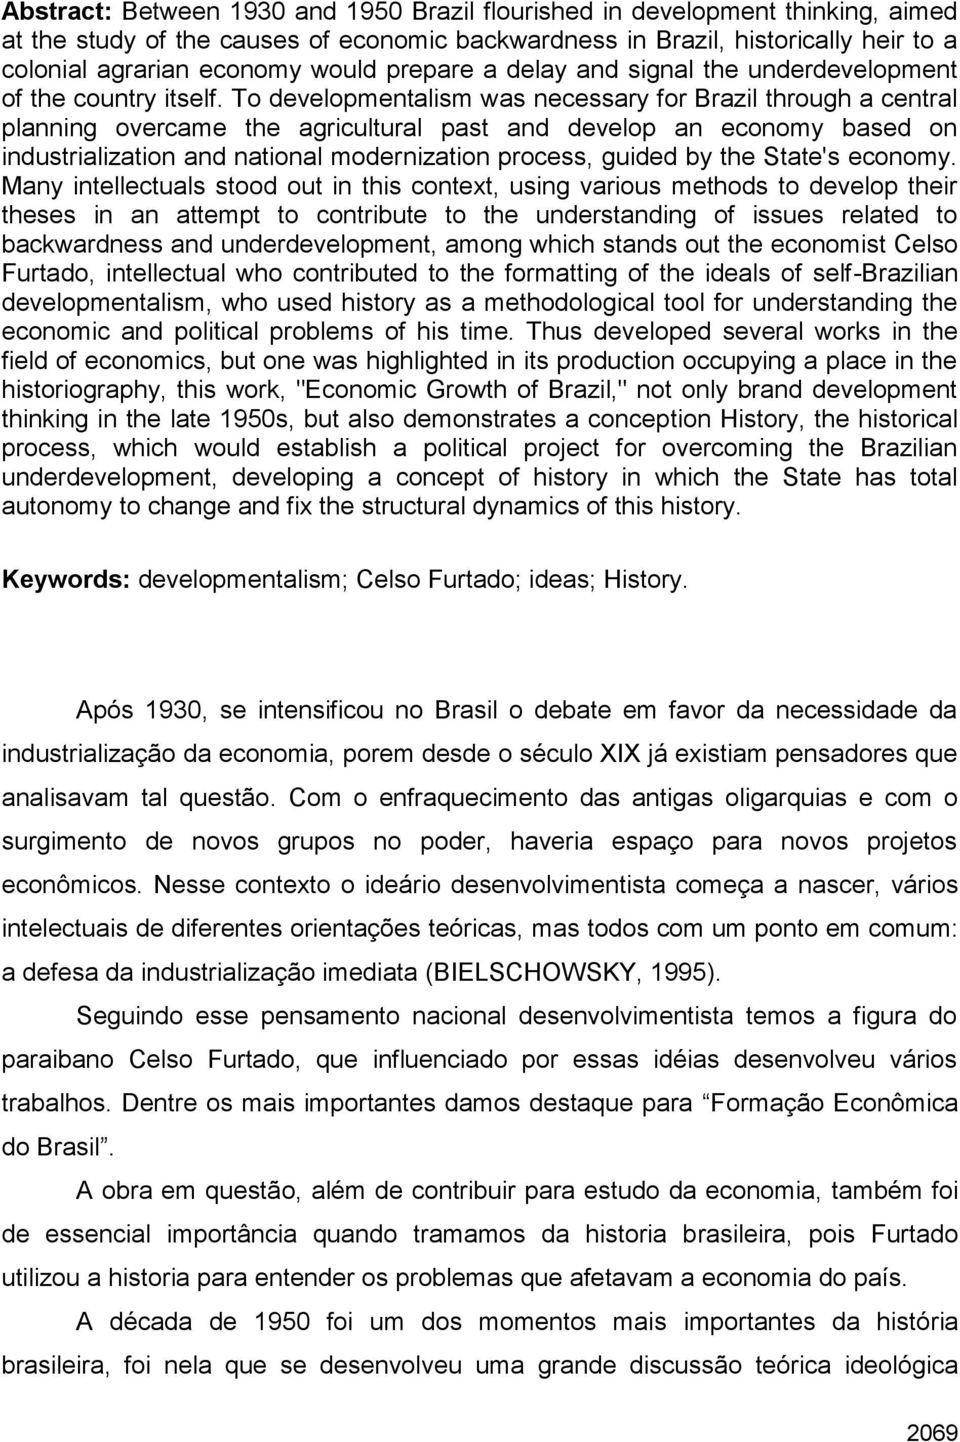 To developmentalism was necessary for Brazil through a central planning overcame the agricultural past and develop an economy based on industrialization and national modernization process, guided by